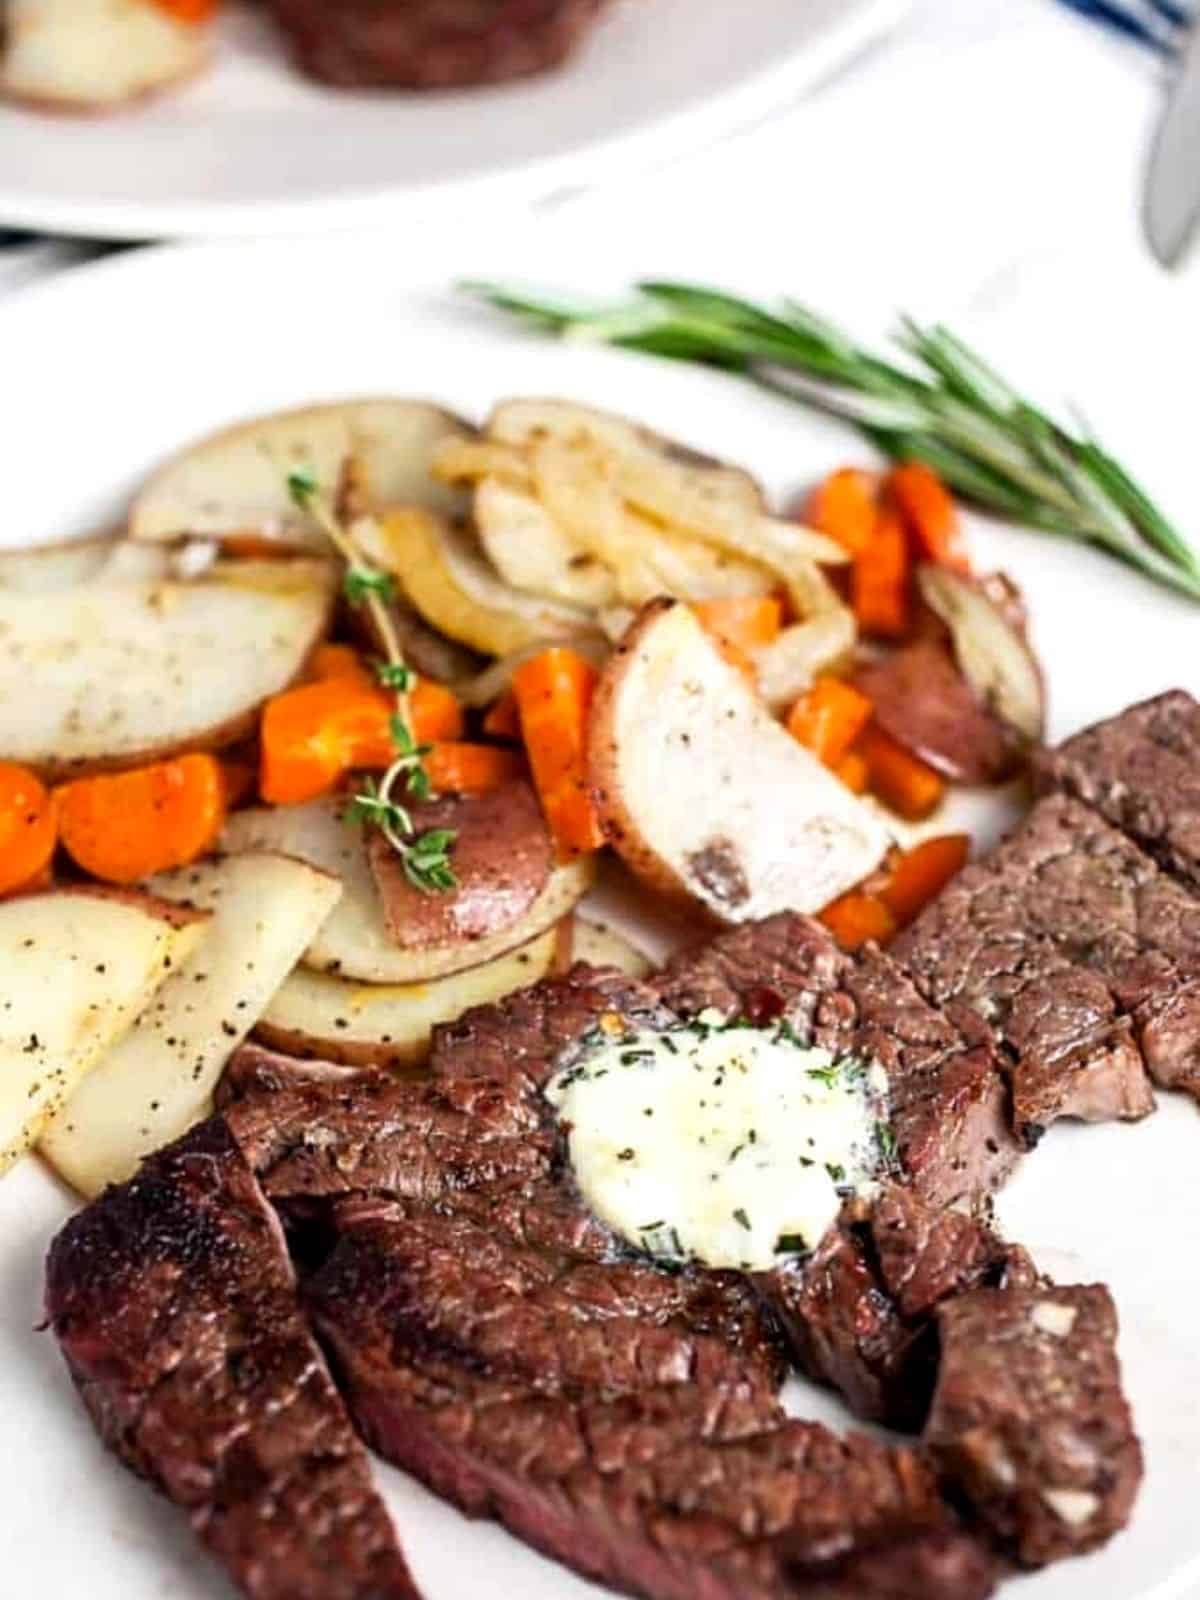 Steak with compound butter and vegetables.